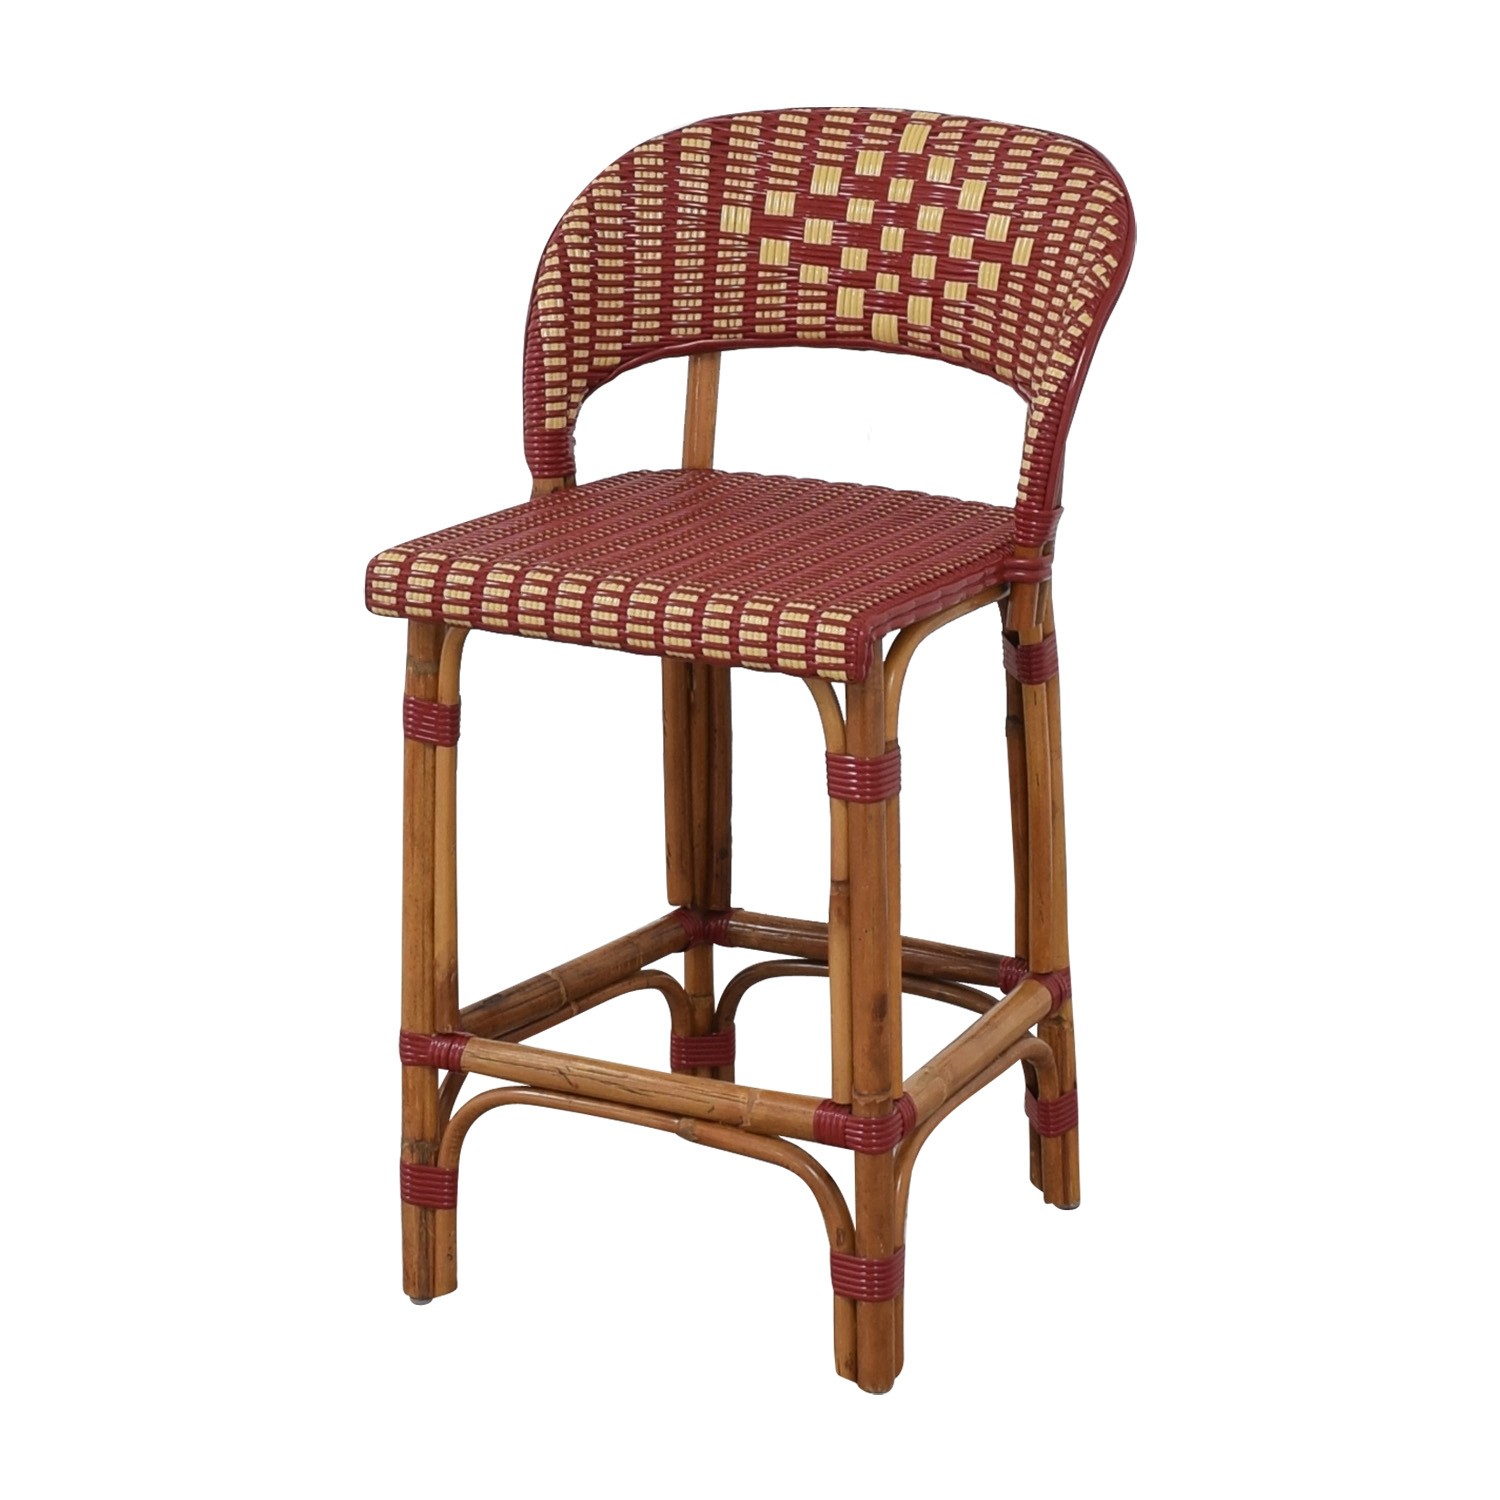 80 off beaufurn beaufurn french bistro bar stools chairs